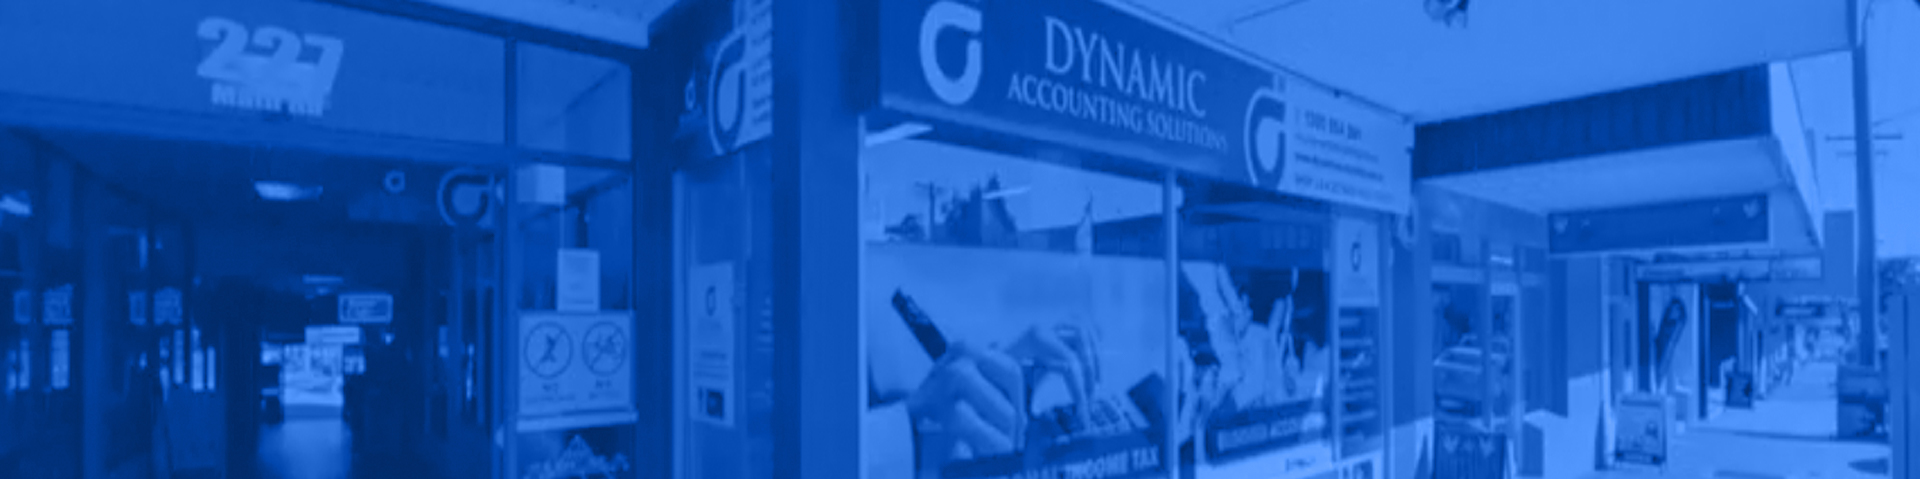 Dynamic Accounting Solutions